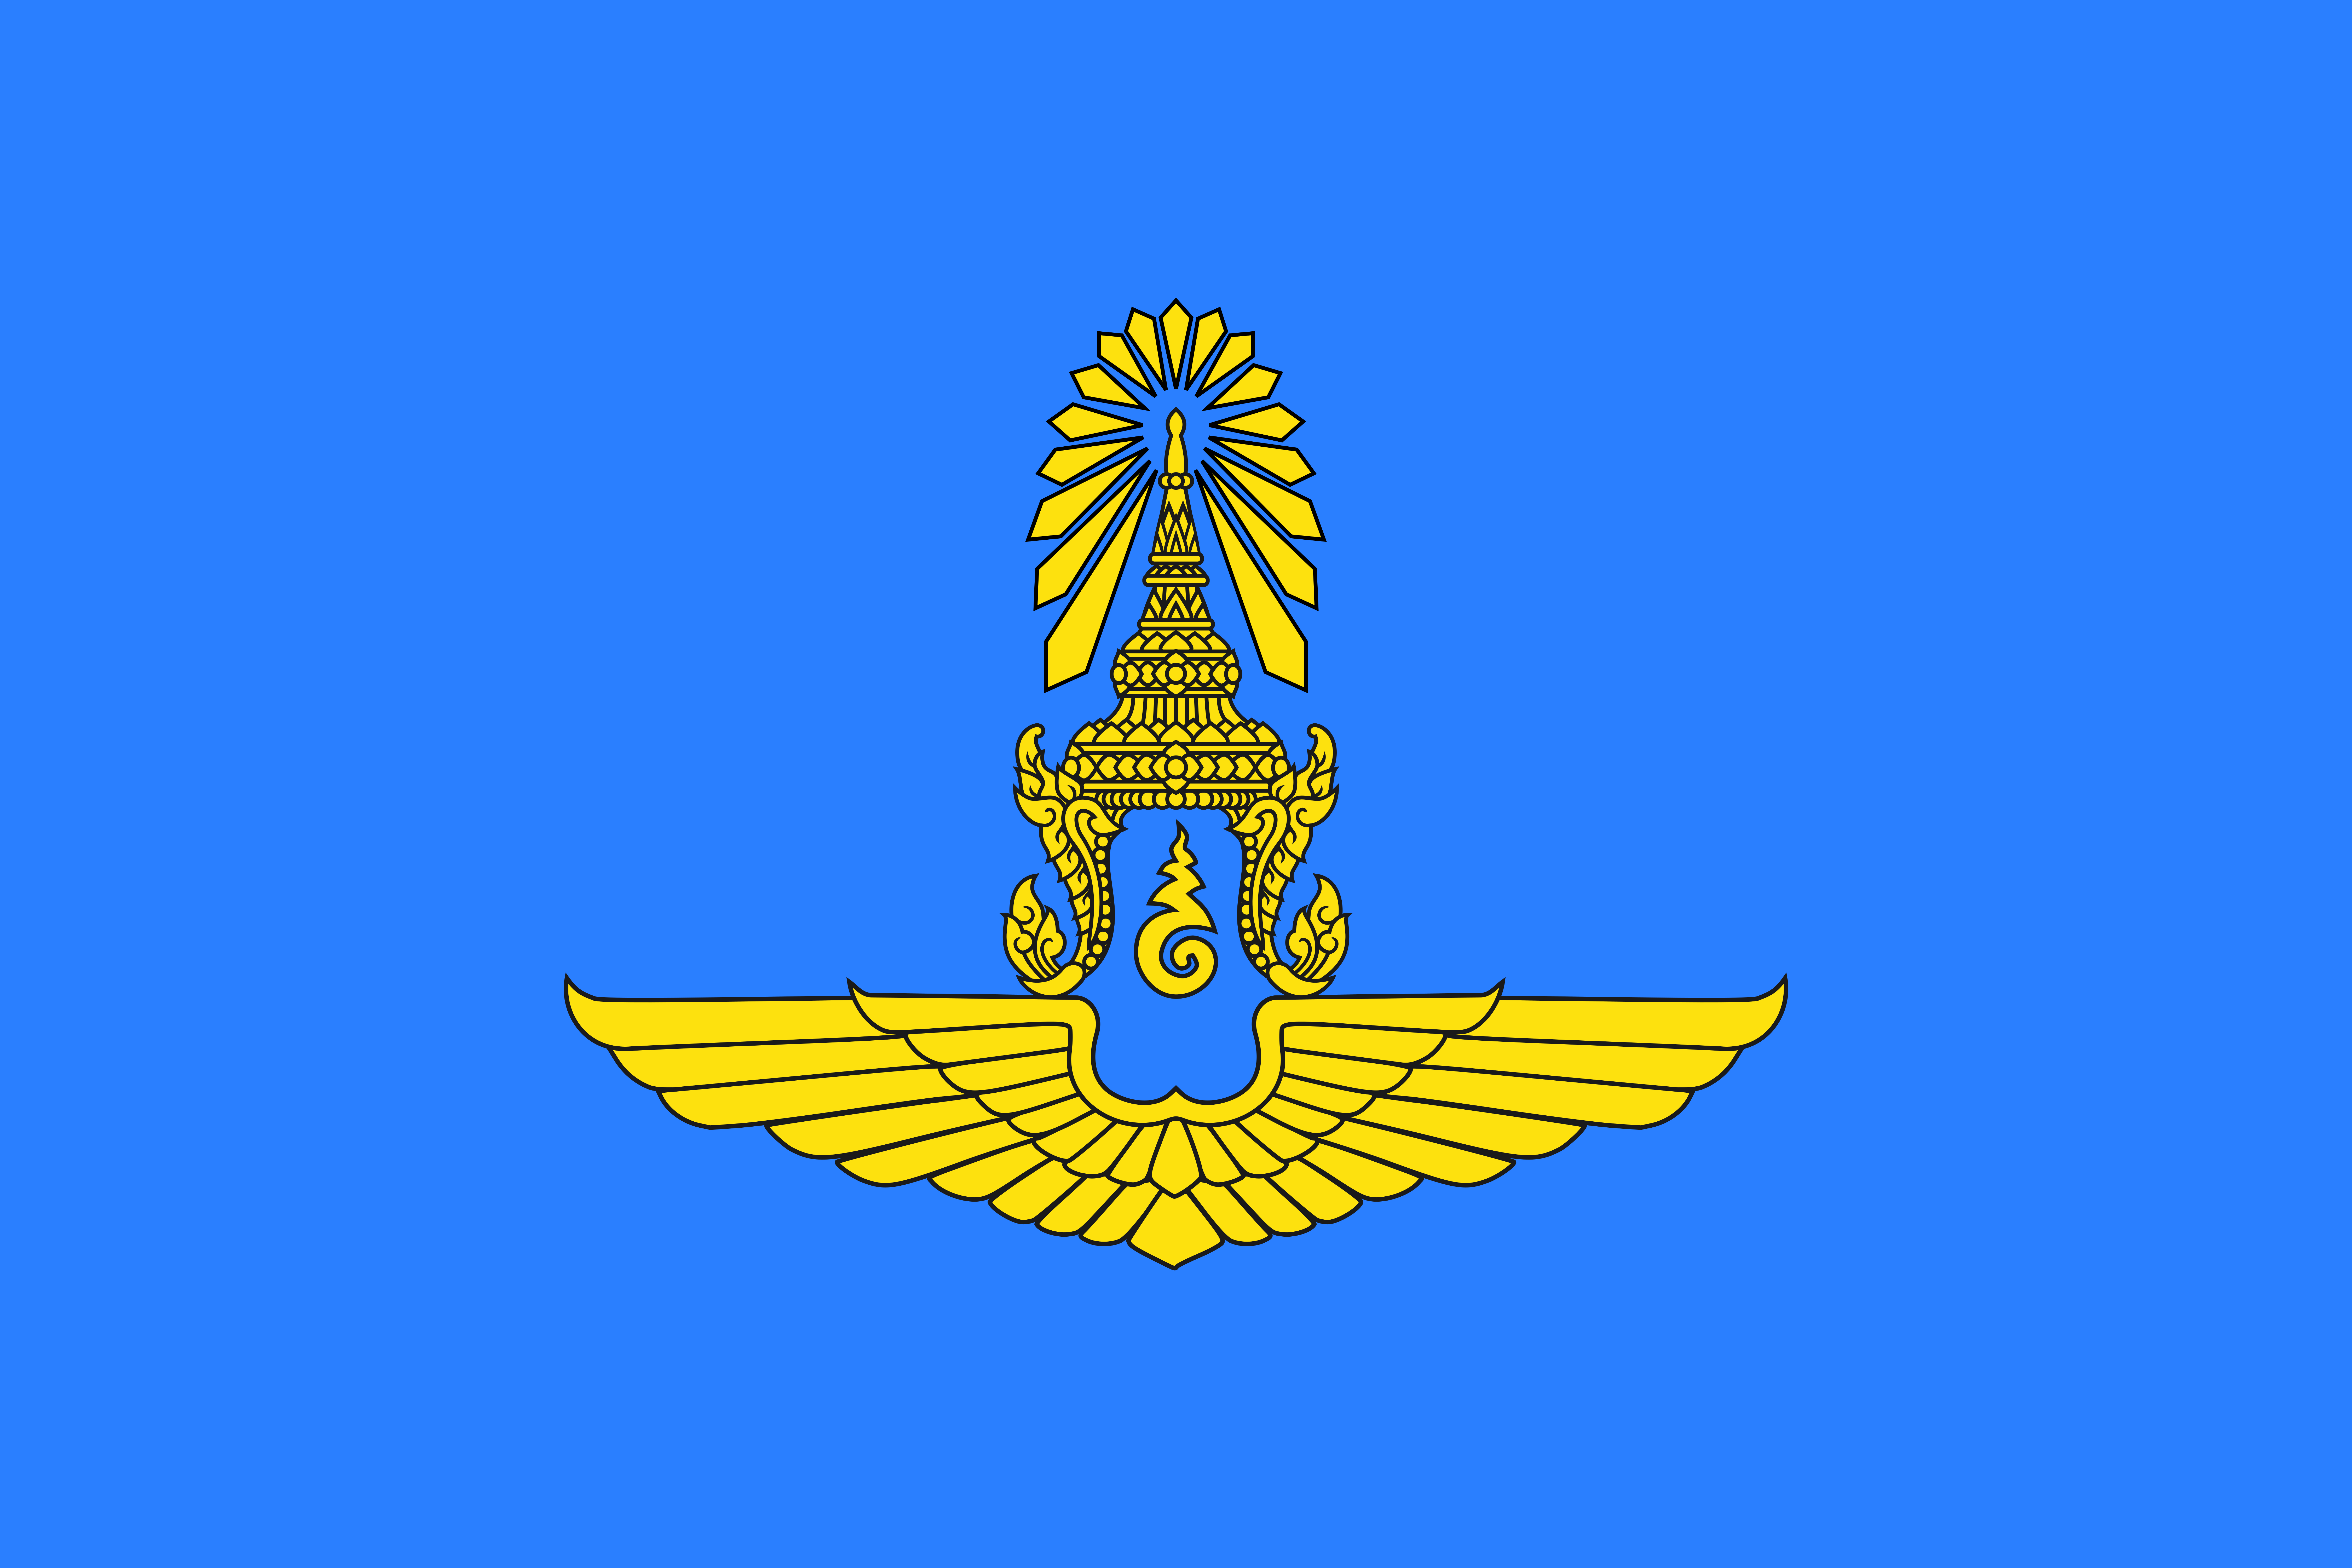 Download File:Flag of the Royal Thai Air Force.svg - Wikimedia Commons